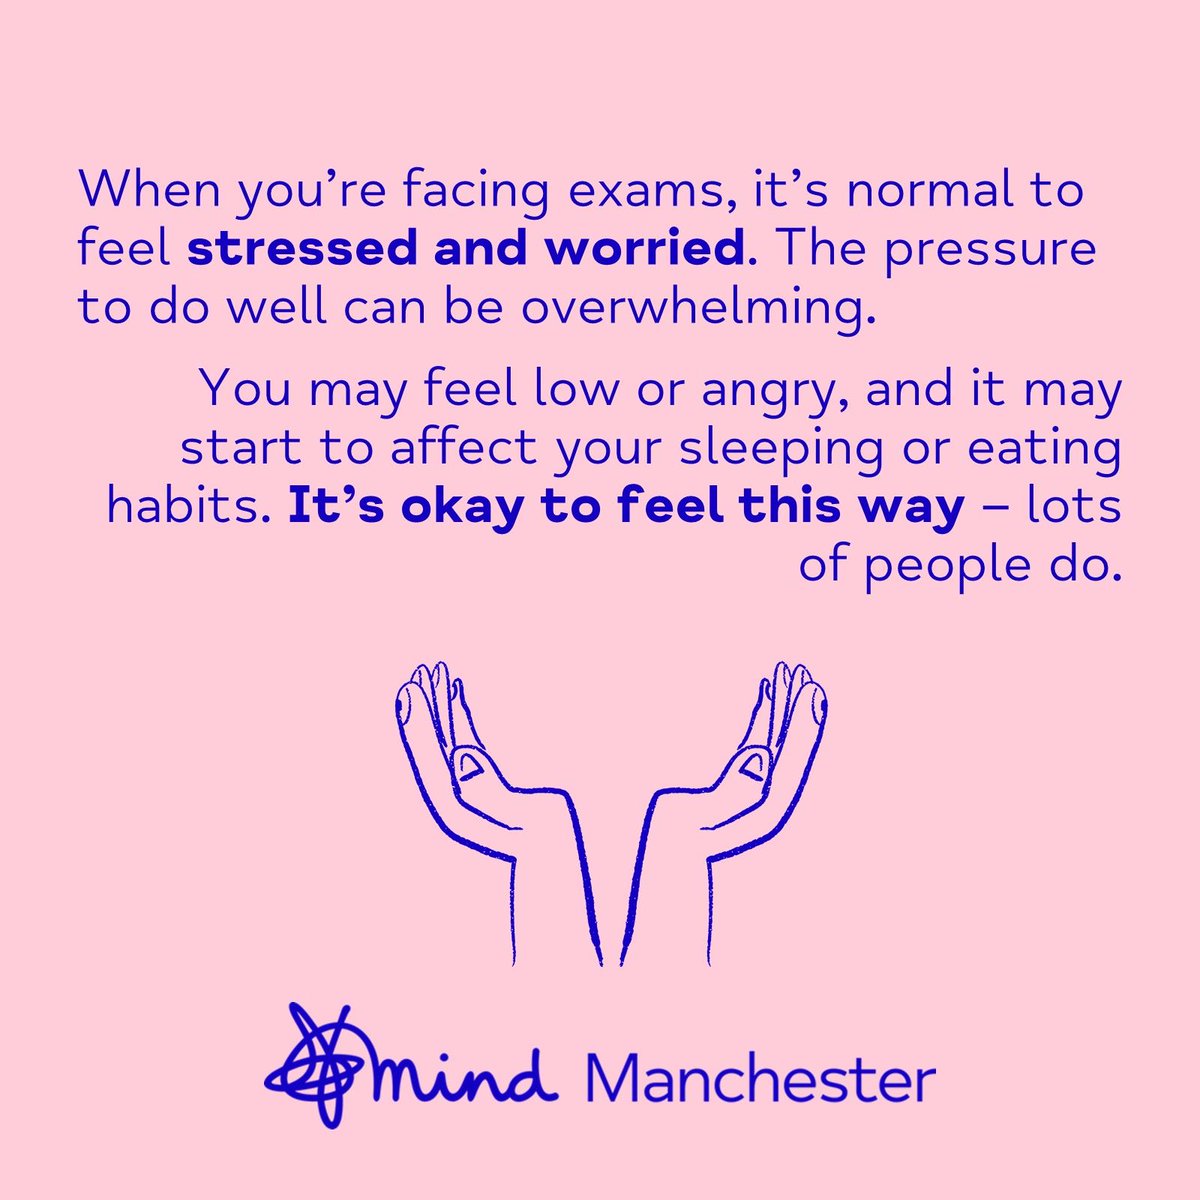 This #WellbeingWednesday we are focusing on exam stress... so please pass this onto any young people who are currently sitting exams. 

When facing exams, it’s normal for people to feel stressed and worried. The pressure to do well can be overwhelming...